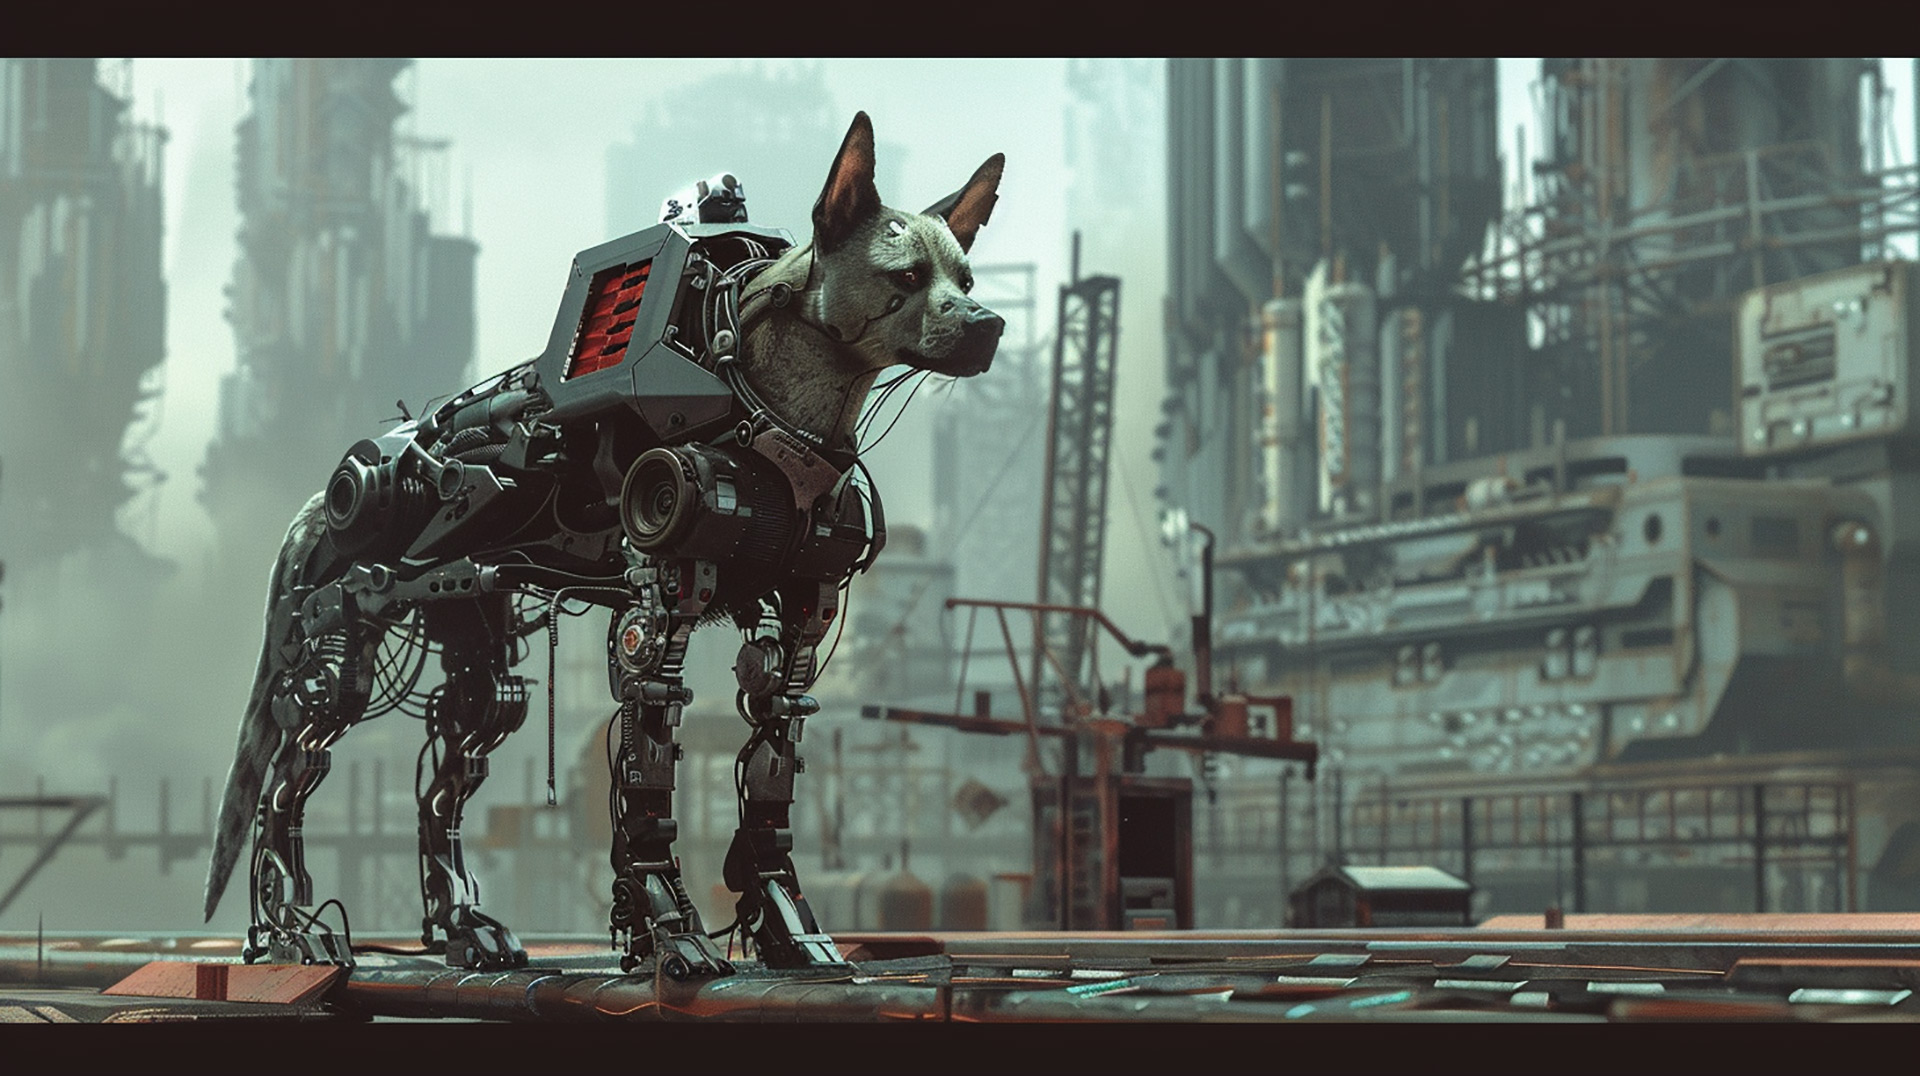 Free Cyborg Dog Wallpaper for Sci-Fi Fans - Encourages users to download free wallpapers.